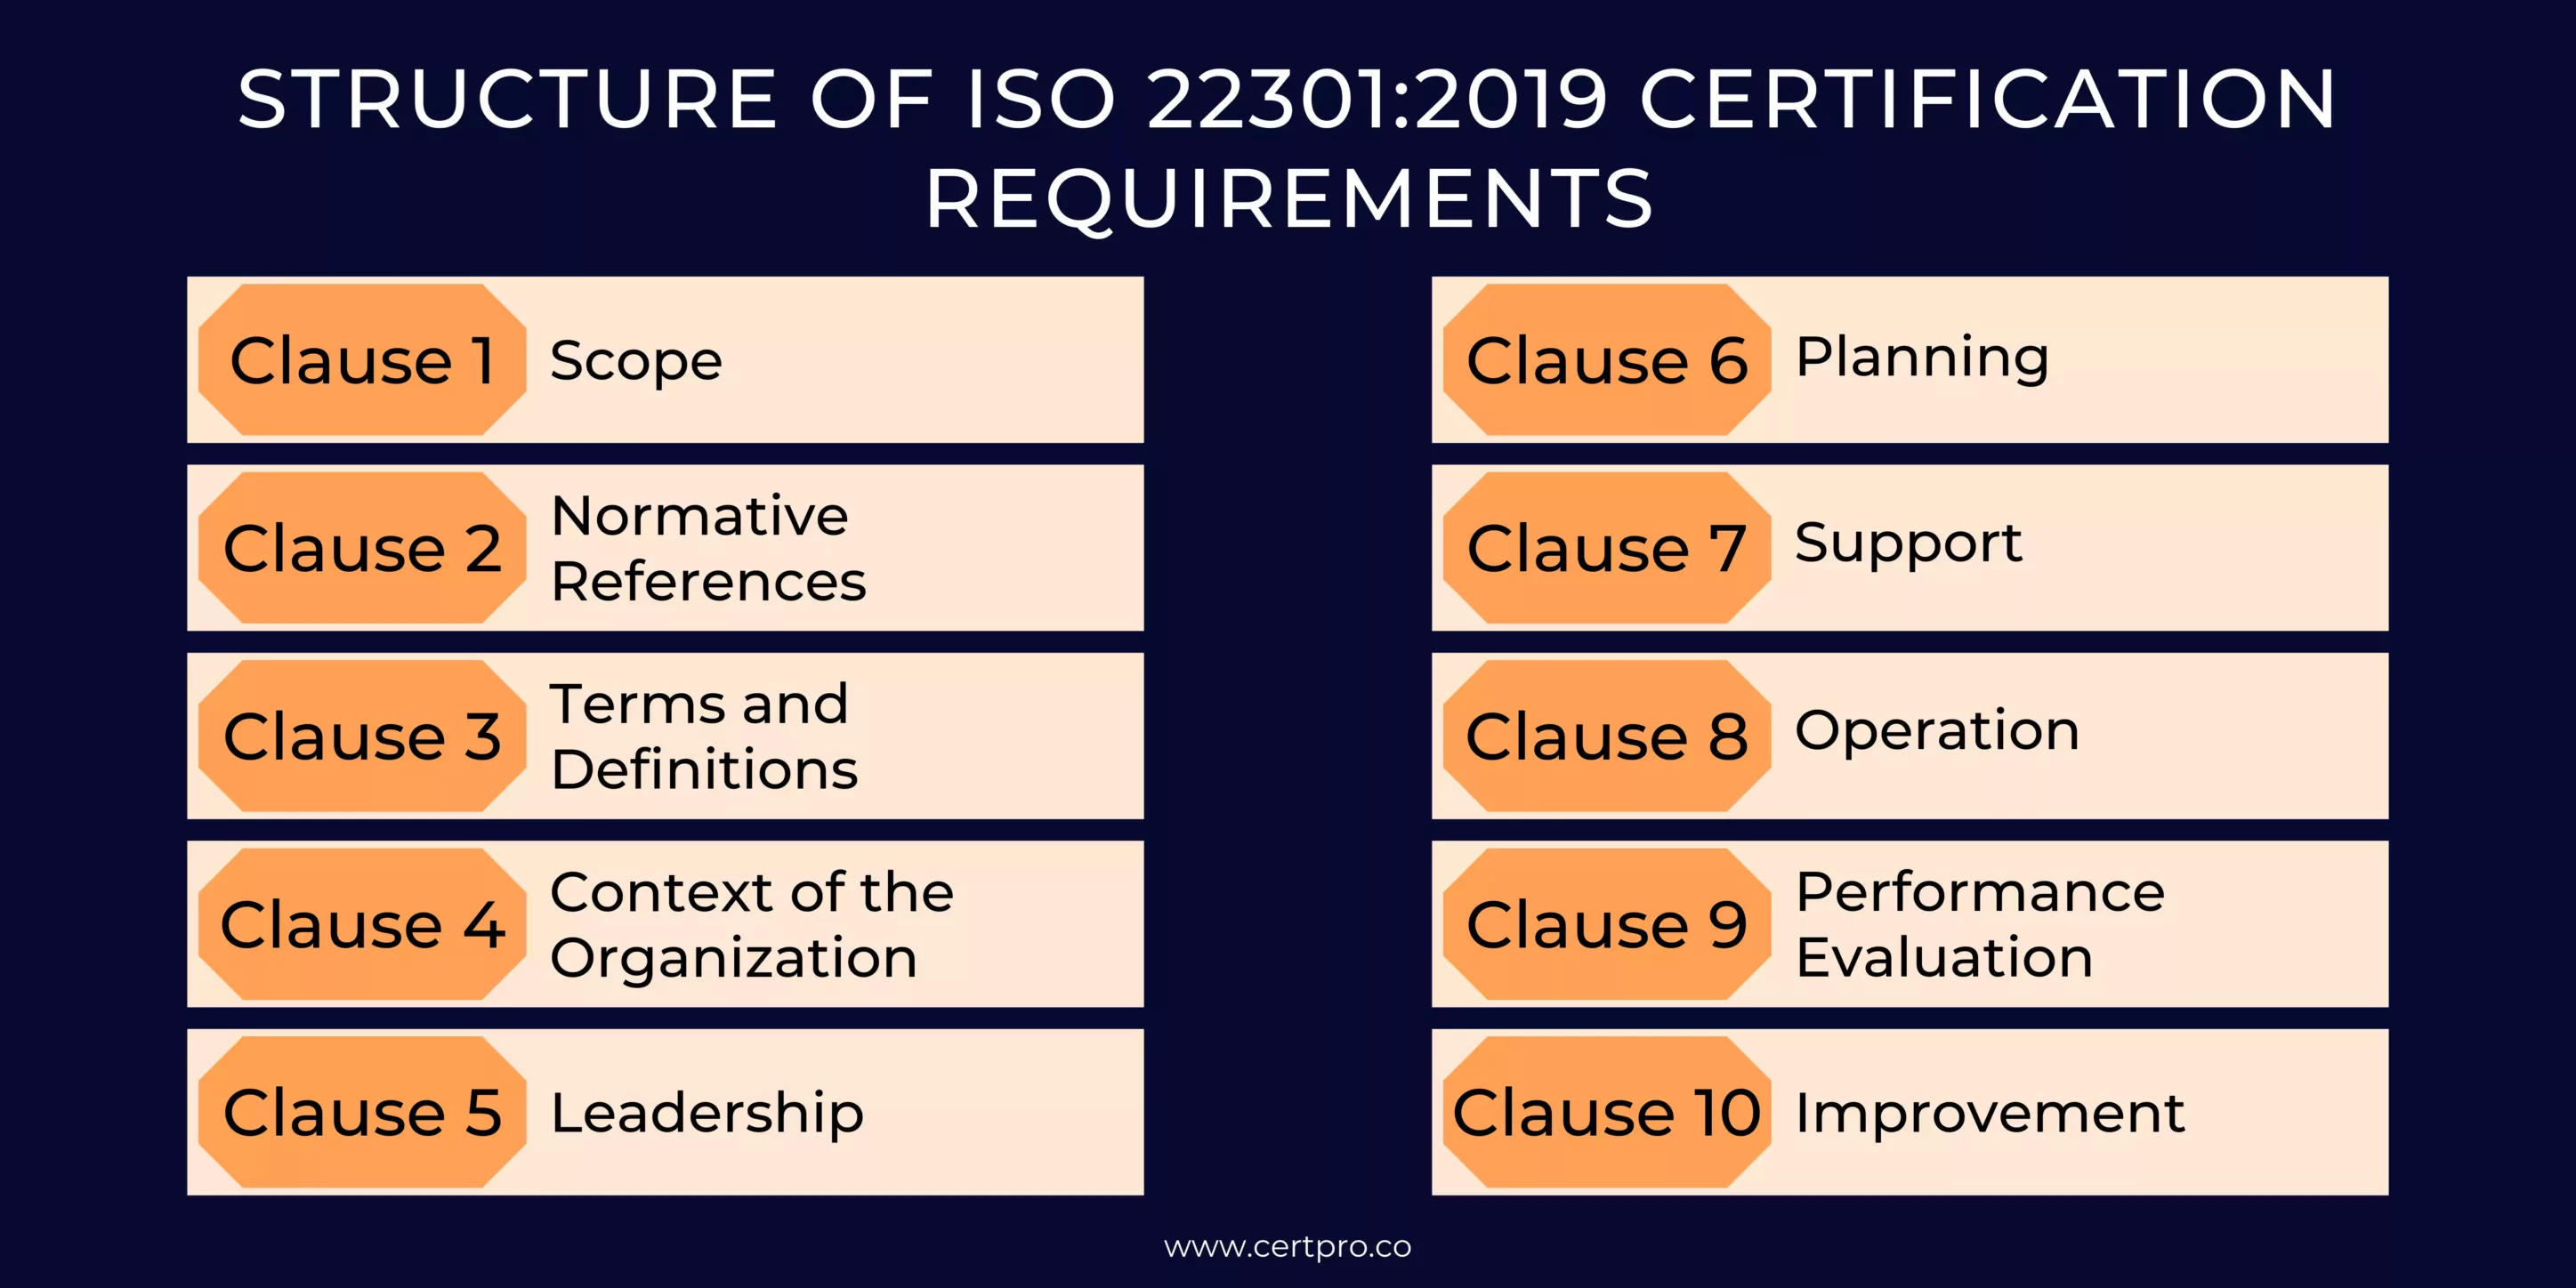 STRUCTURE OF ISO 22301